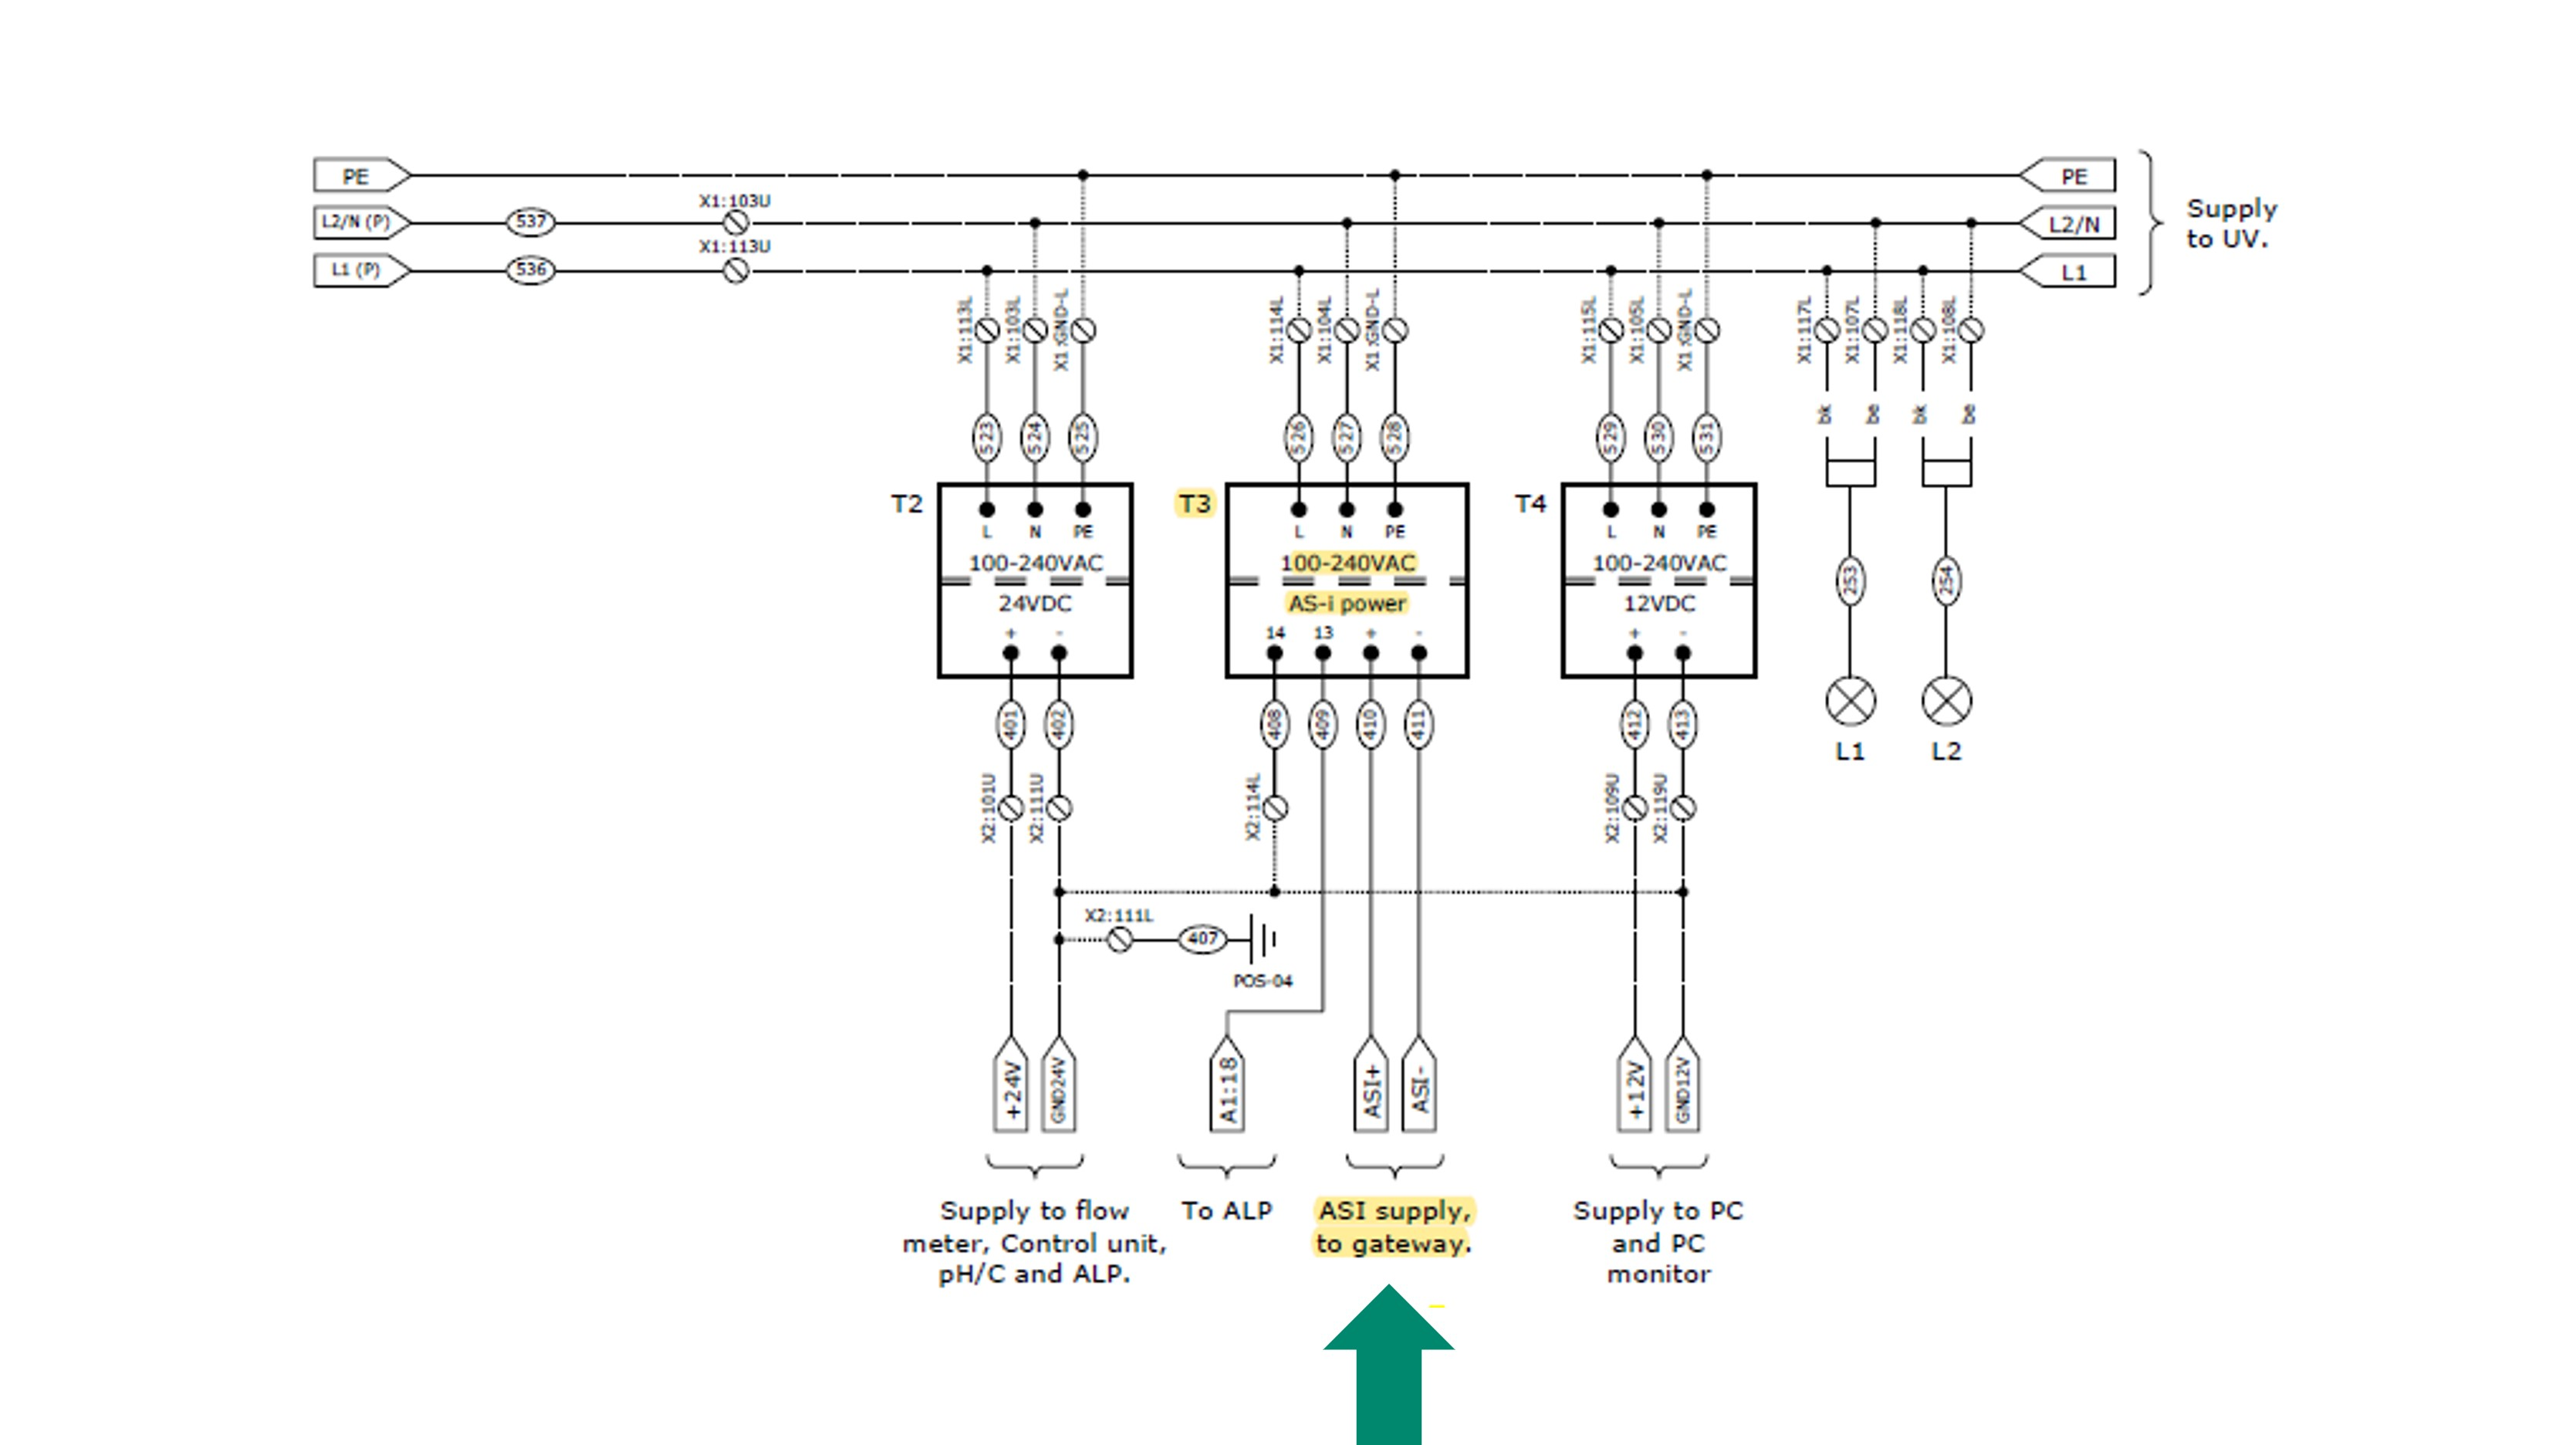 Schematic showing the faulty power supply (T3). T3 supplies power to the AS-interface (AS-i) gateway.